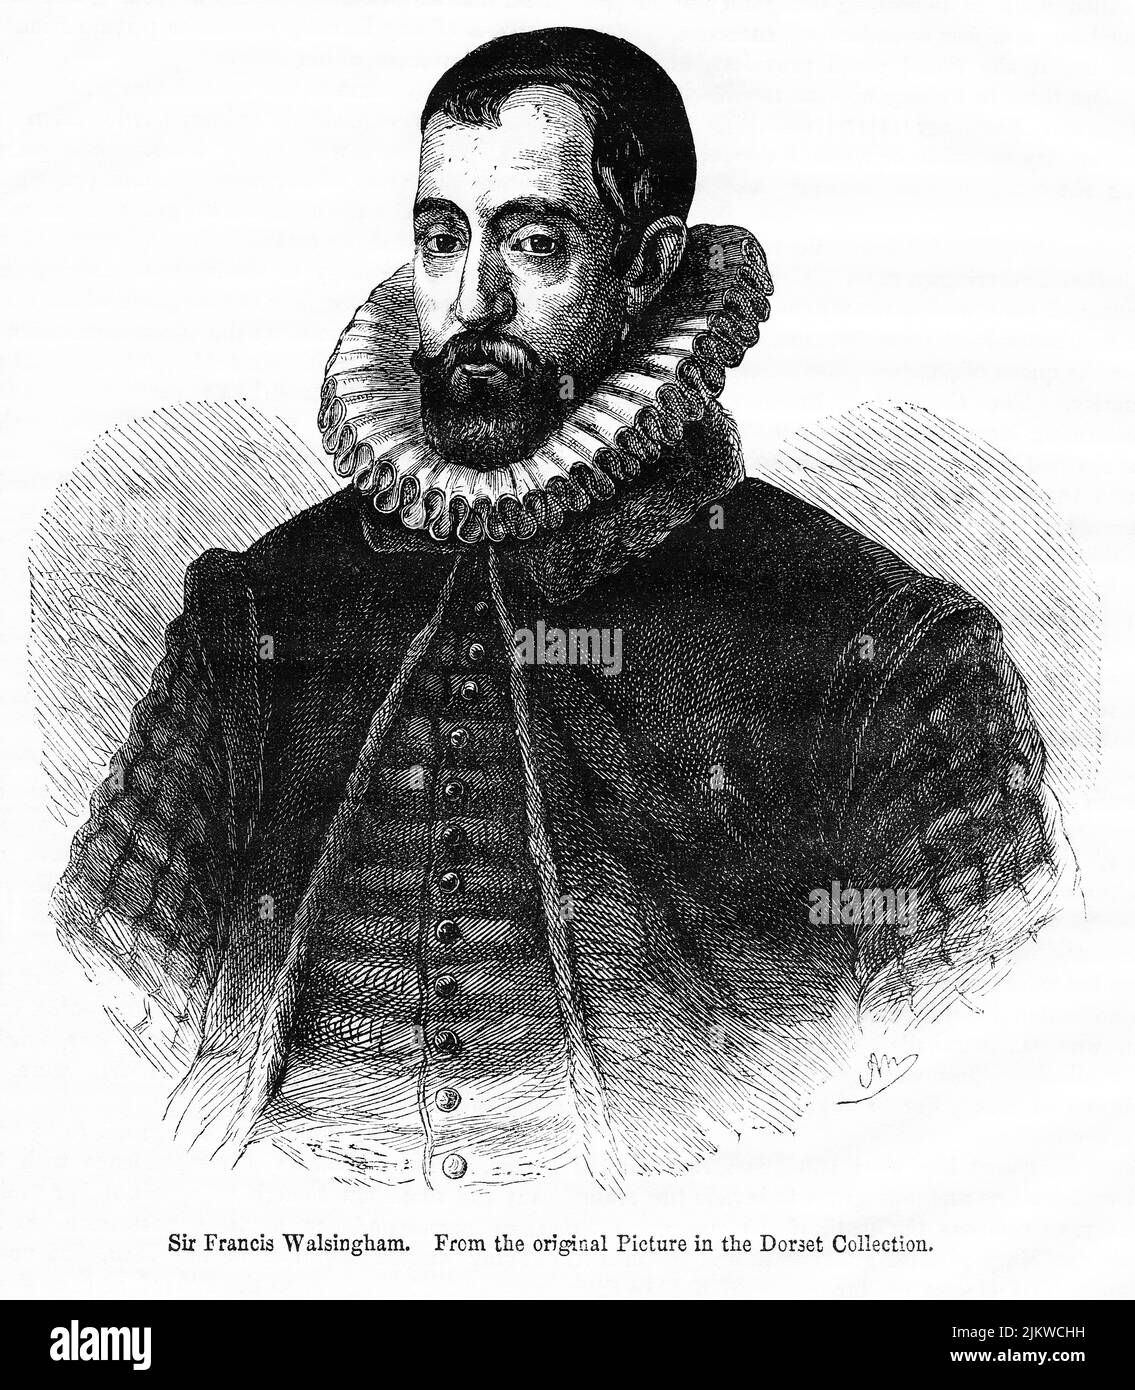 Sir Francis Walsingham, from the original picture in the Dorset Collection, Illustration from the Book, 'John Cassel’s Illustrated History of England, Volume II', text by William Howitt, Cassell, Petter, and Galpin, London, 1858 Stock Photo